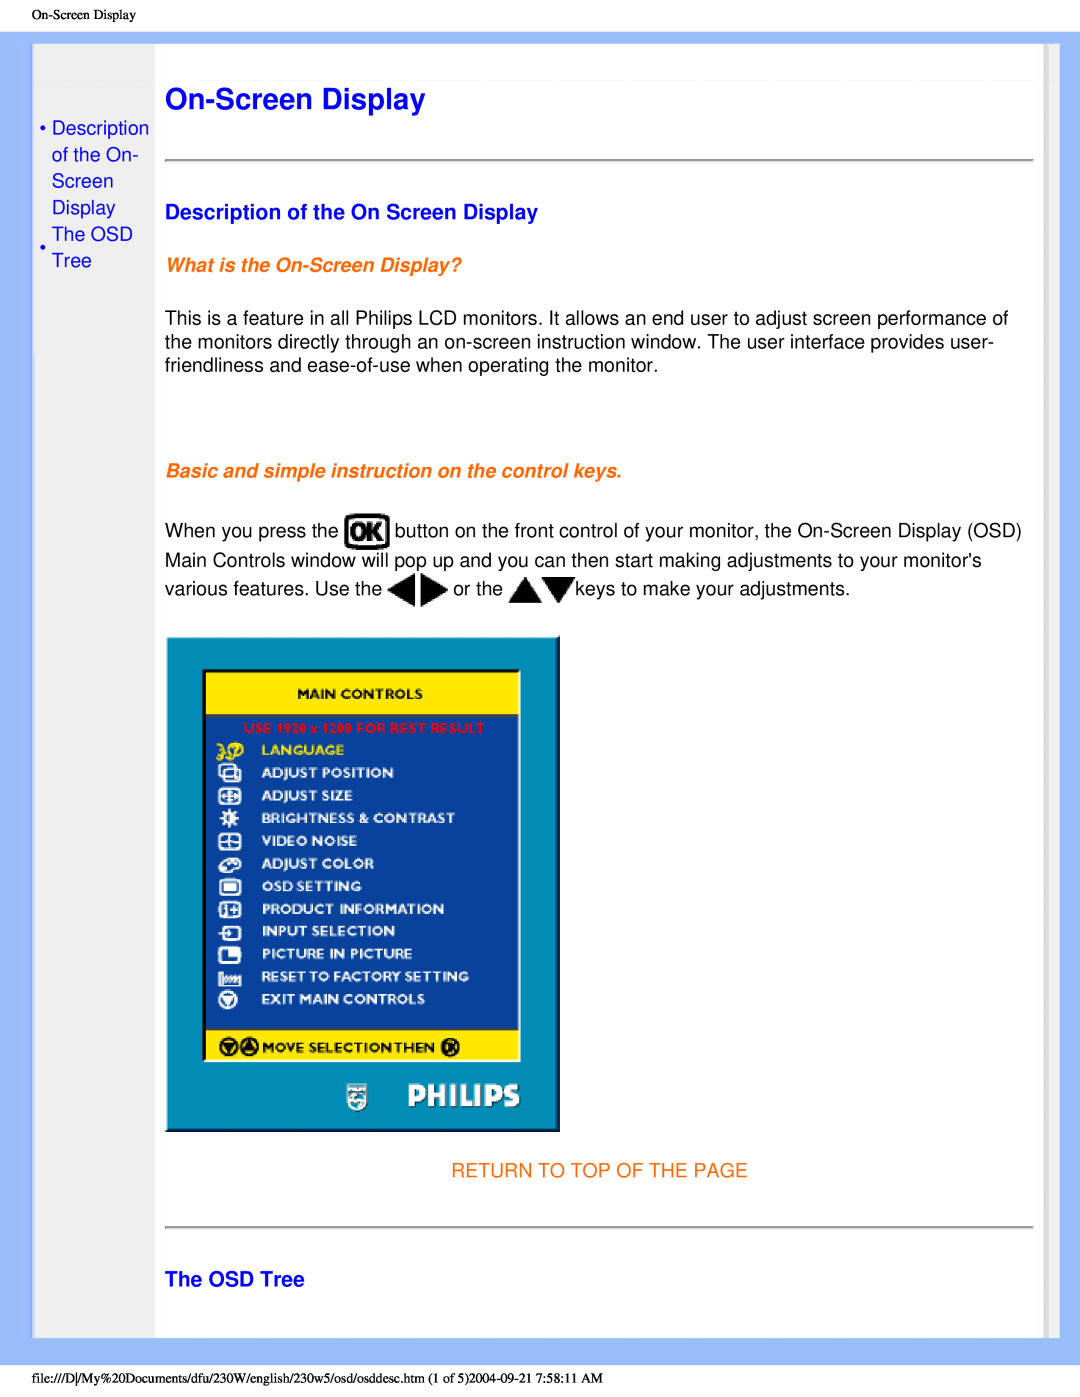 Philips 230w5 On-ScreenDisplay, Description of the On Screen Display, The OSD Tree, Description of the On- Screen Display 